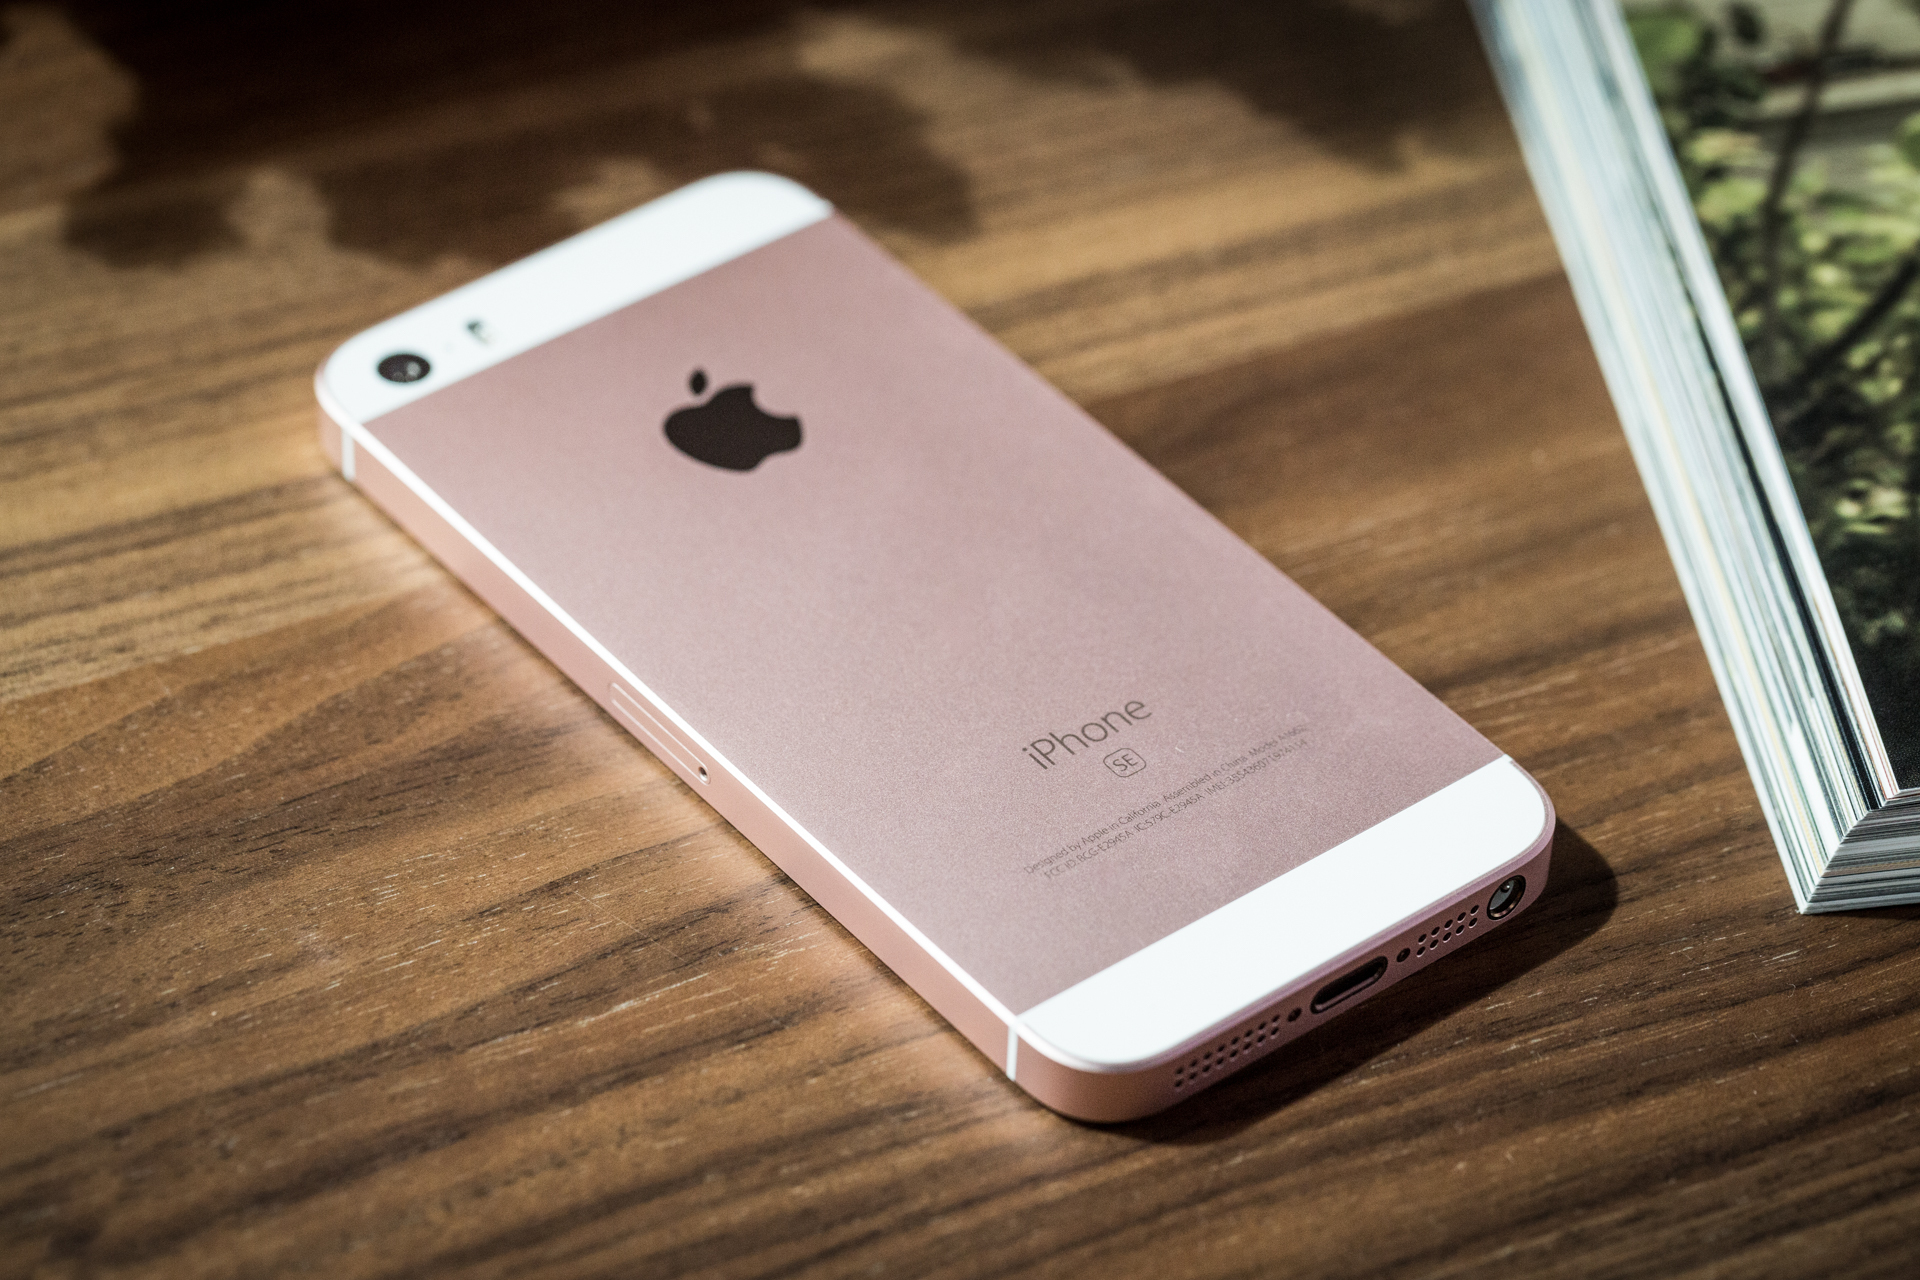 iPhone SE: News, Specs, Price, Release Date, More | Digital